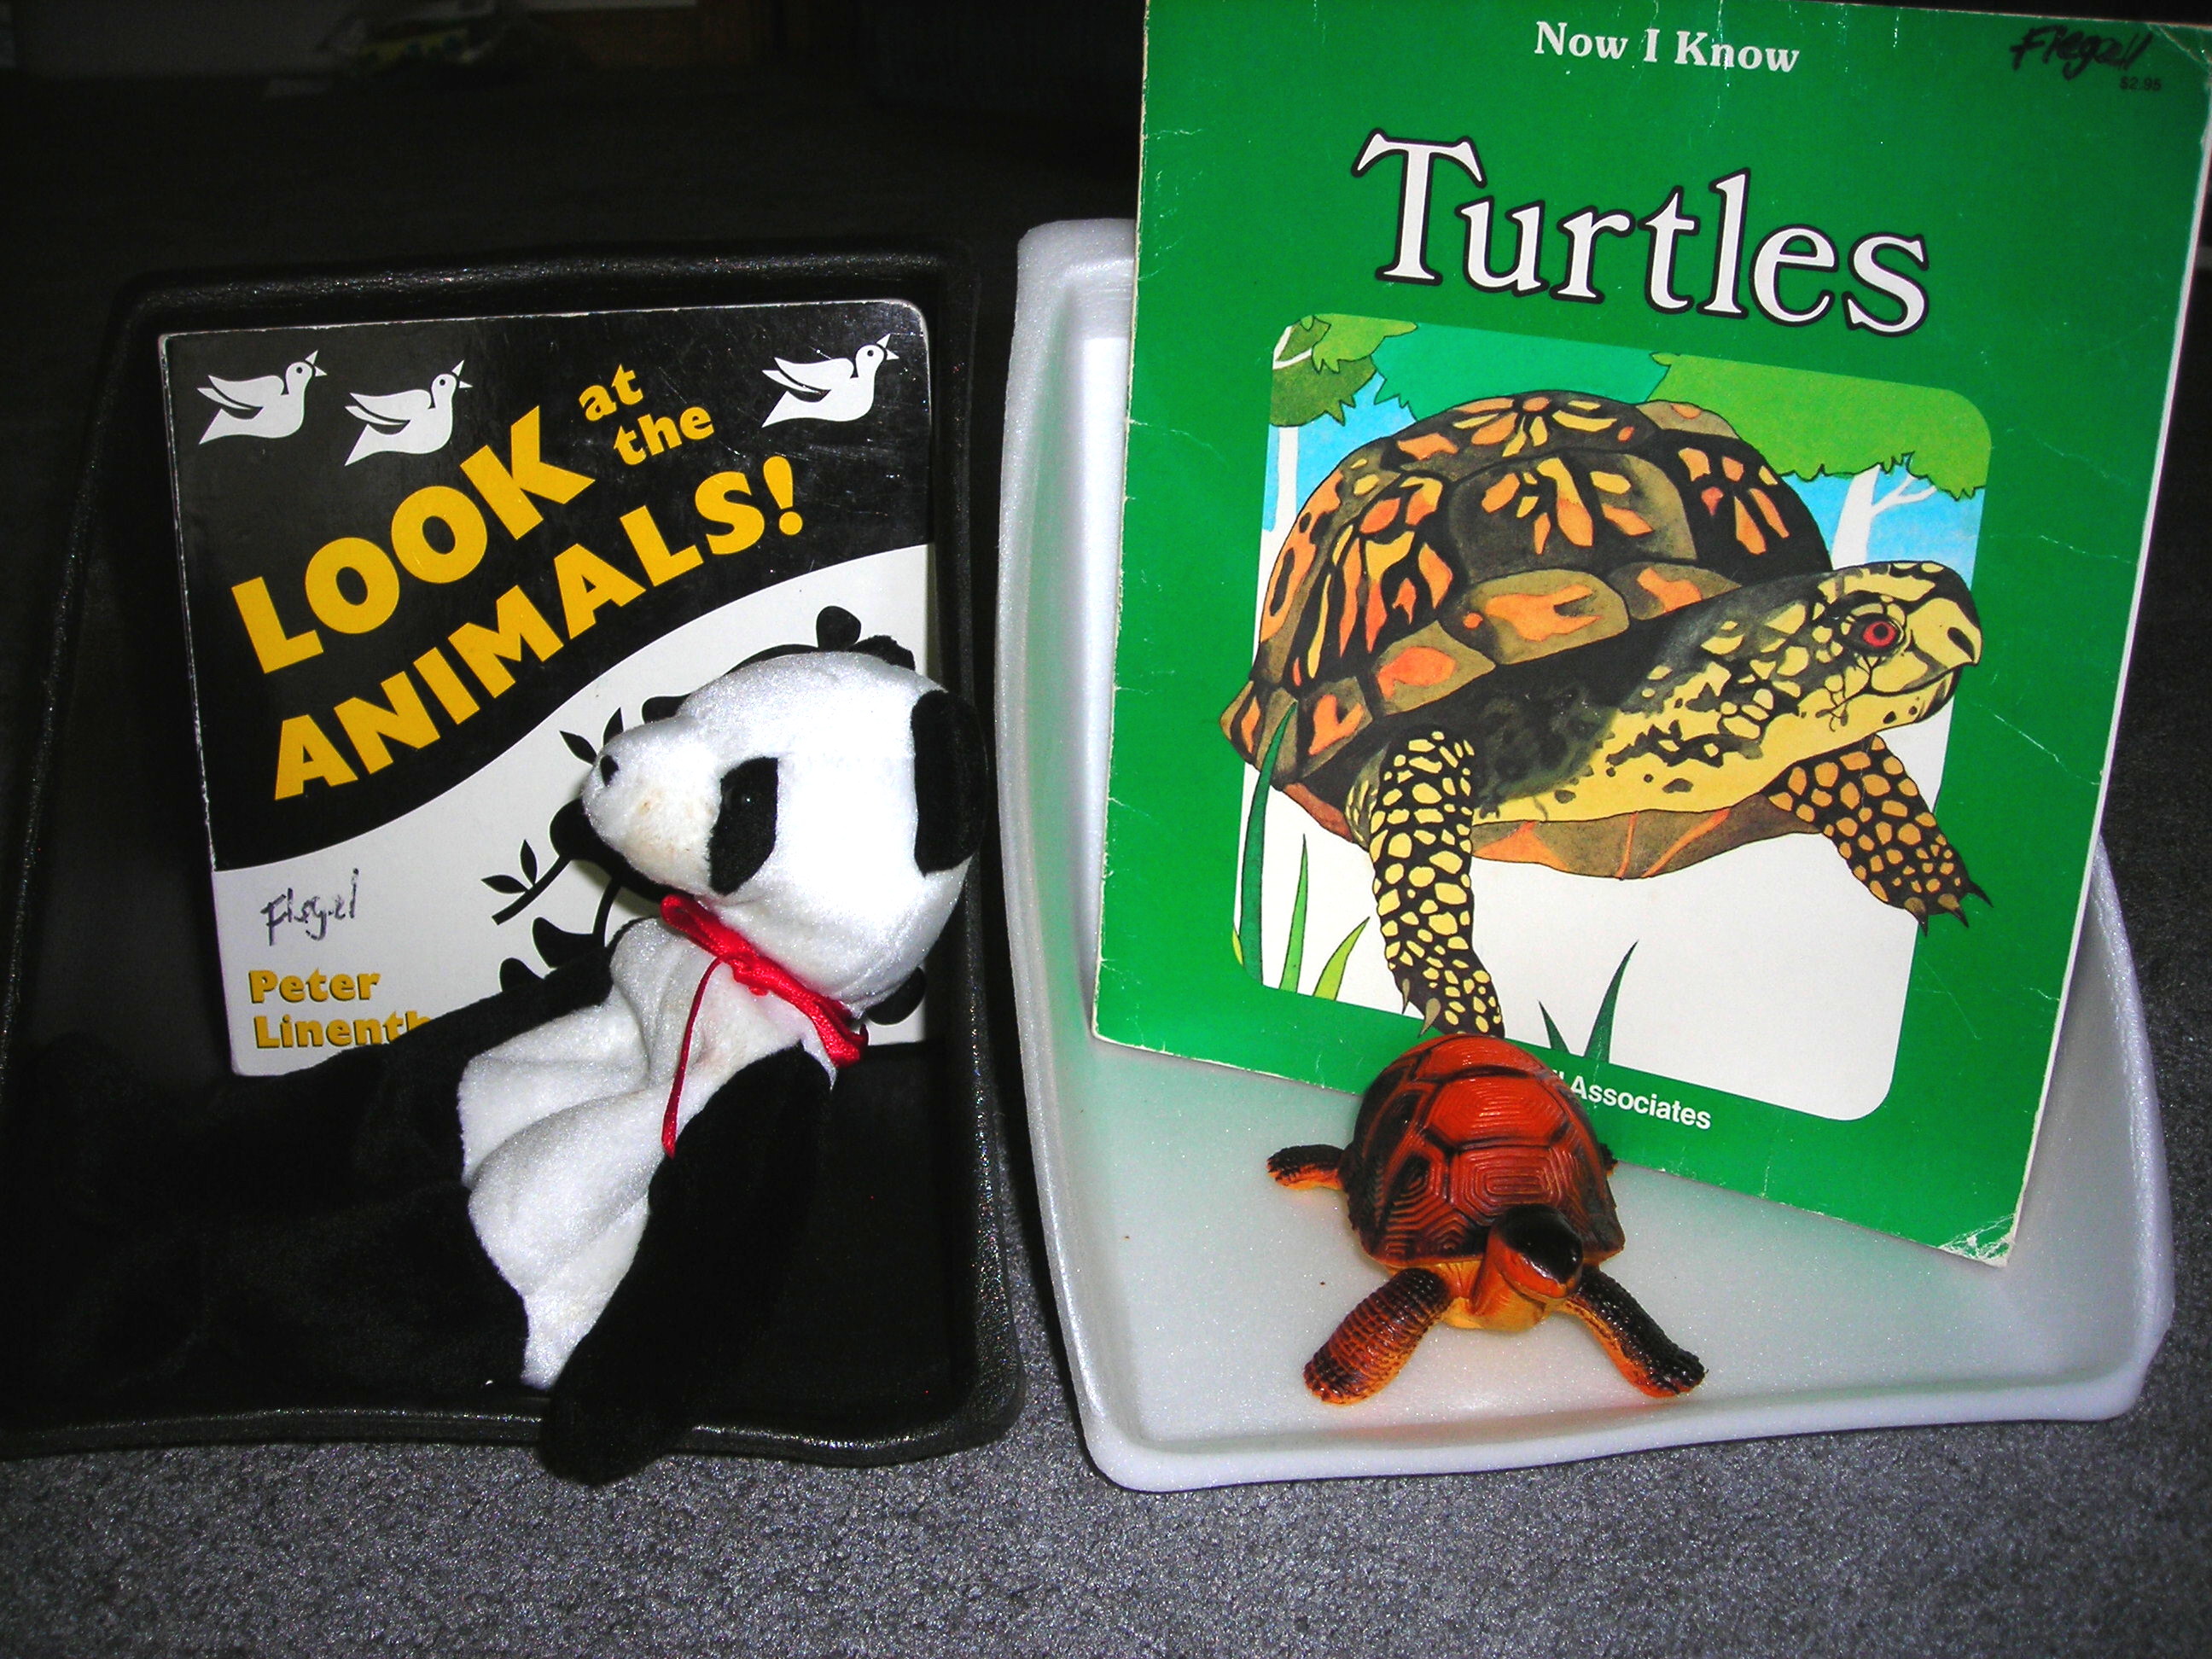 Image of panda bear and turtle with books